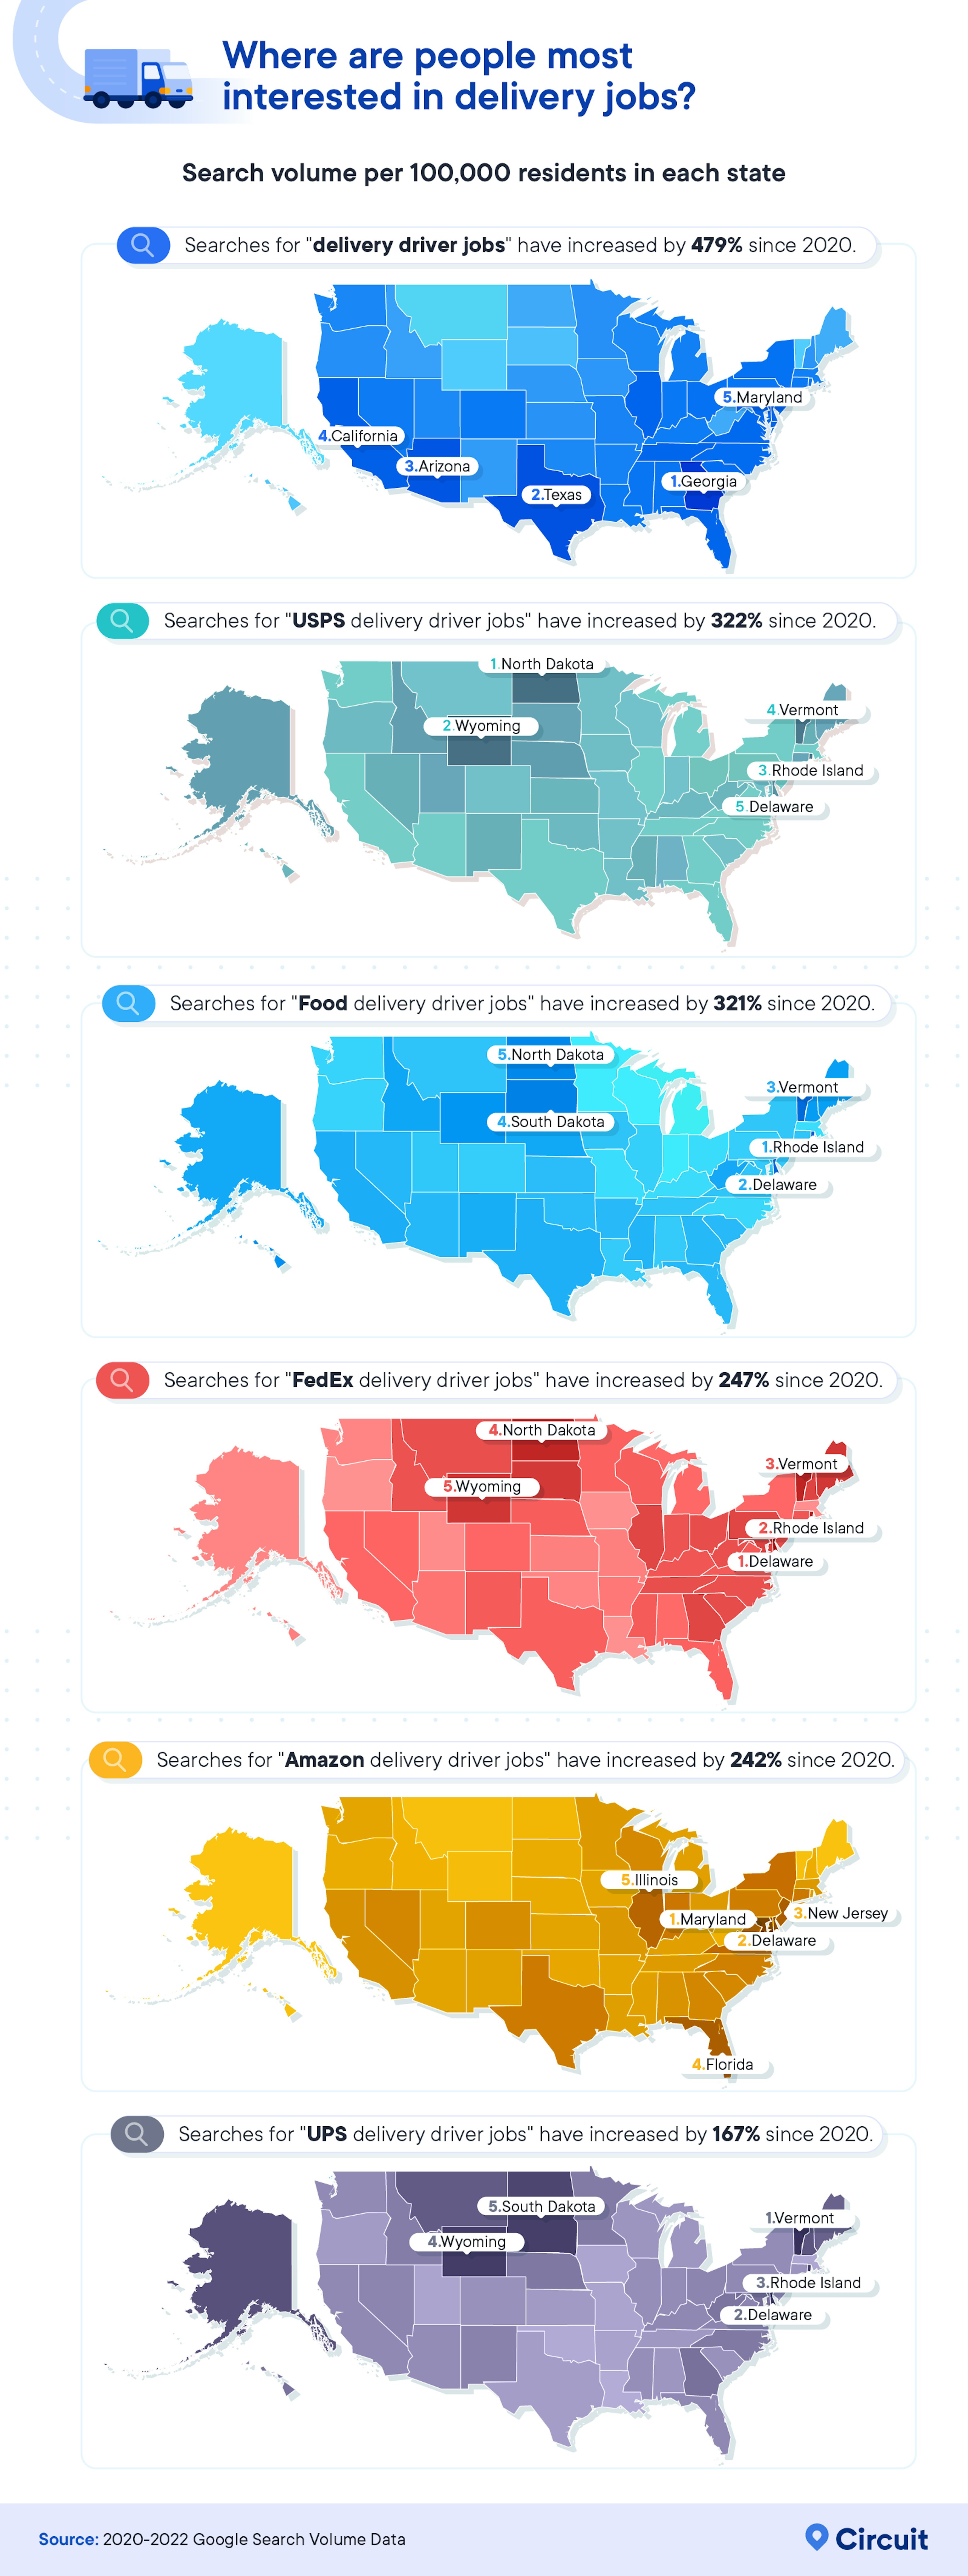 Infographic to analyze where people are most interested in delivery jobs